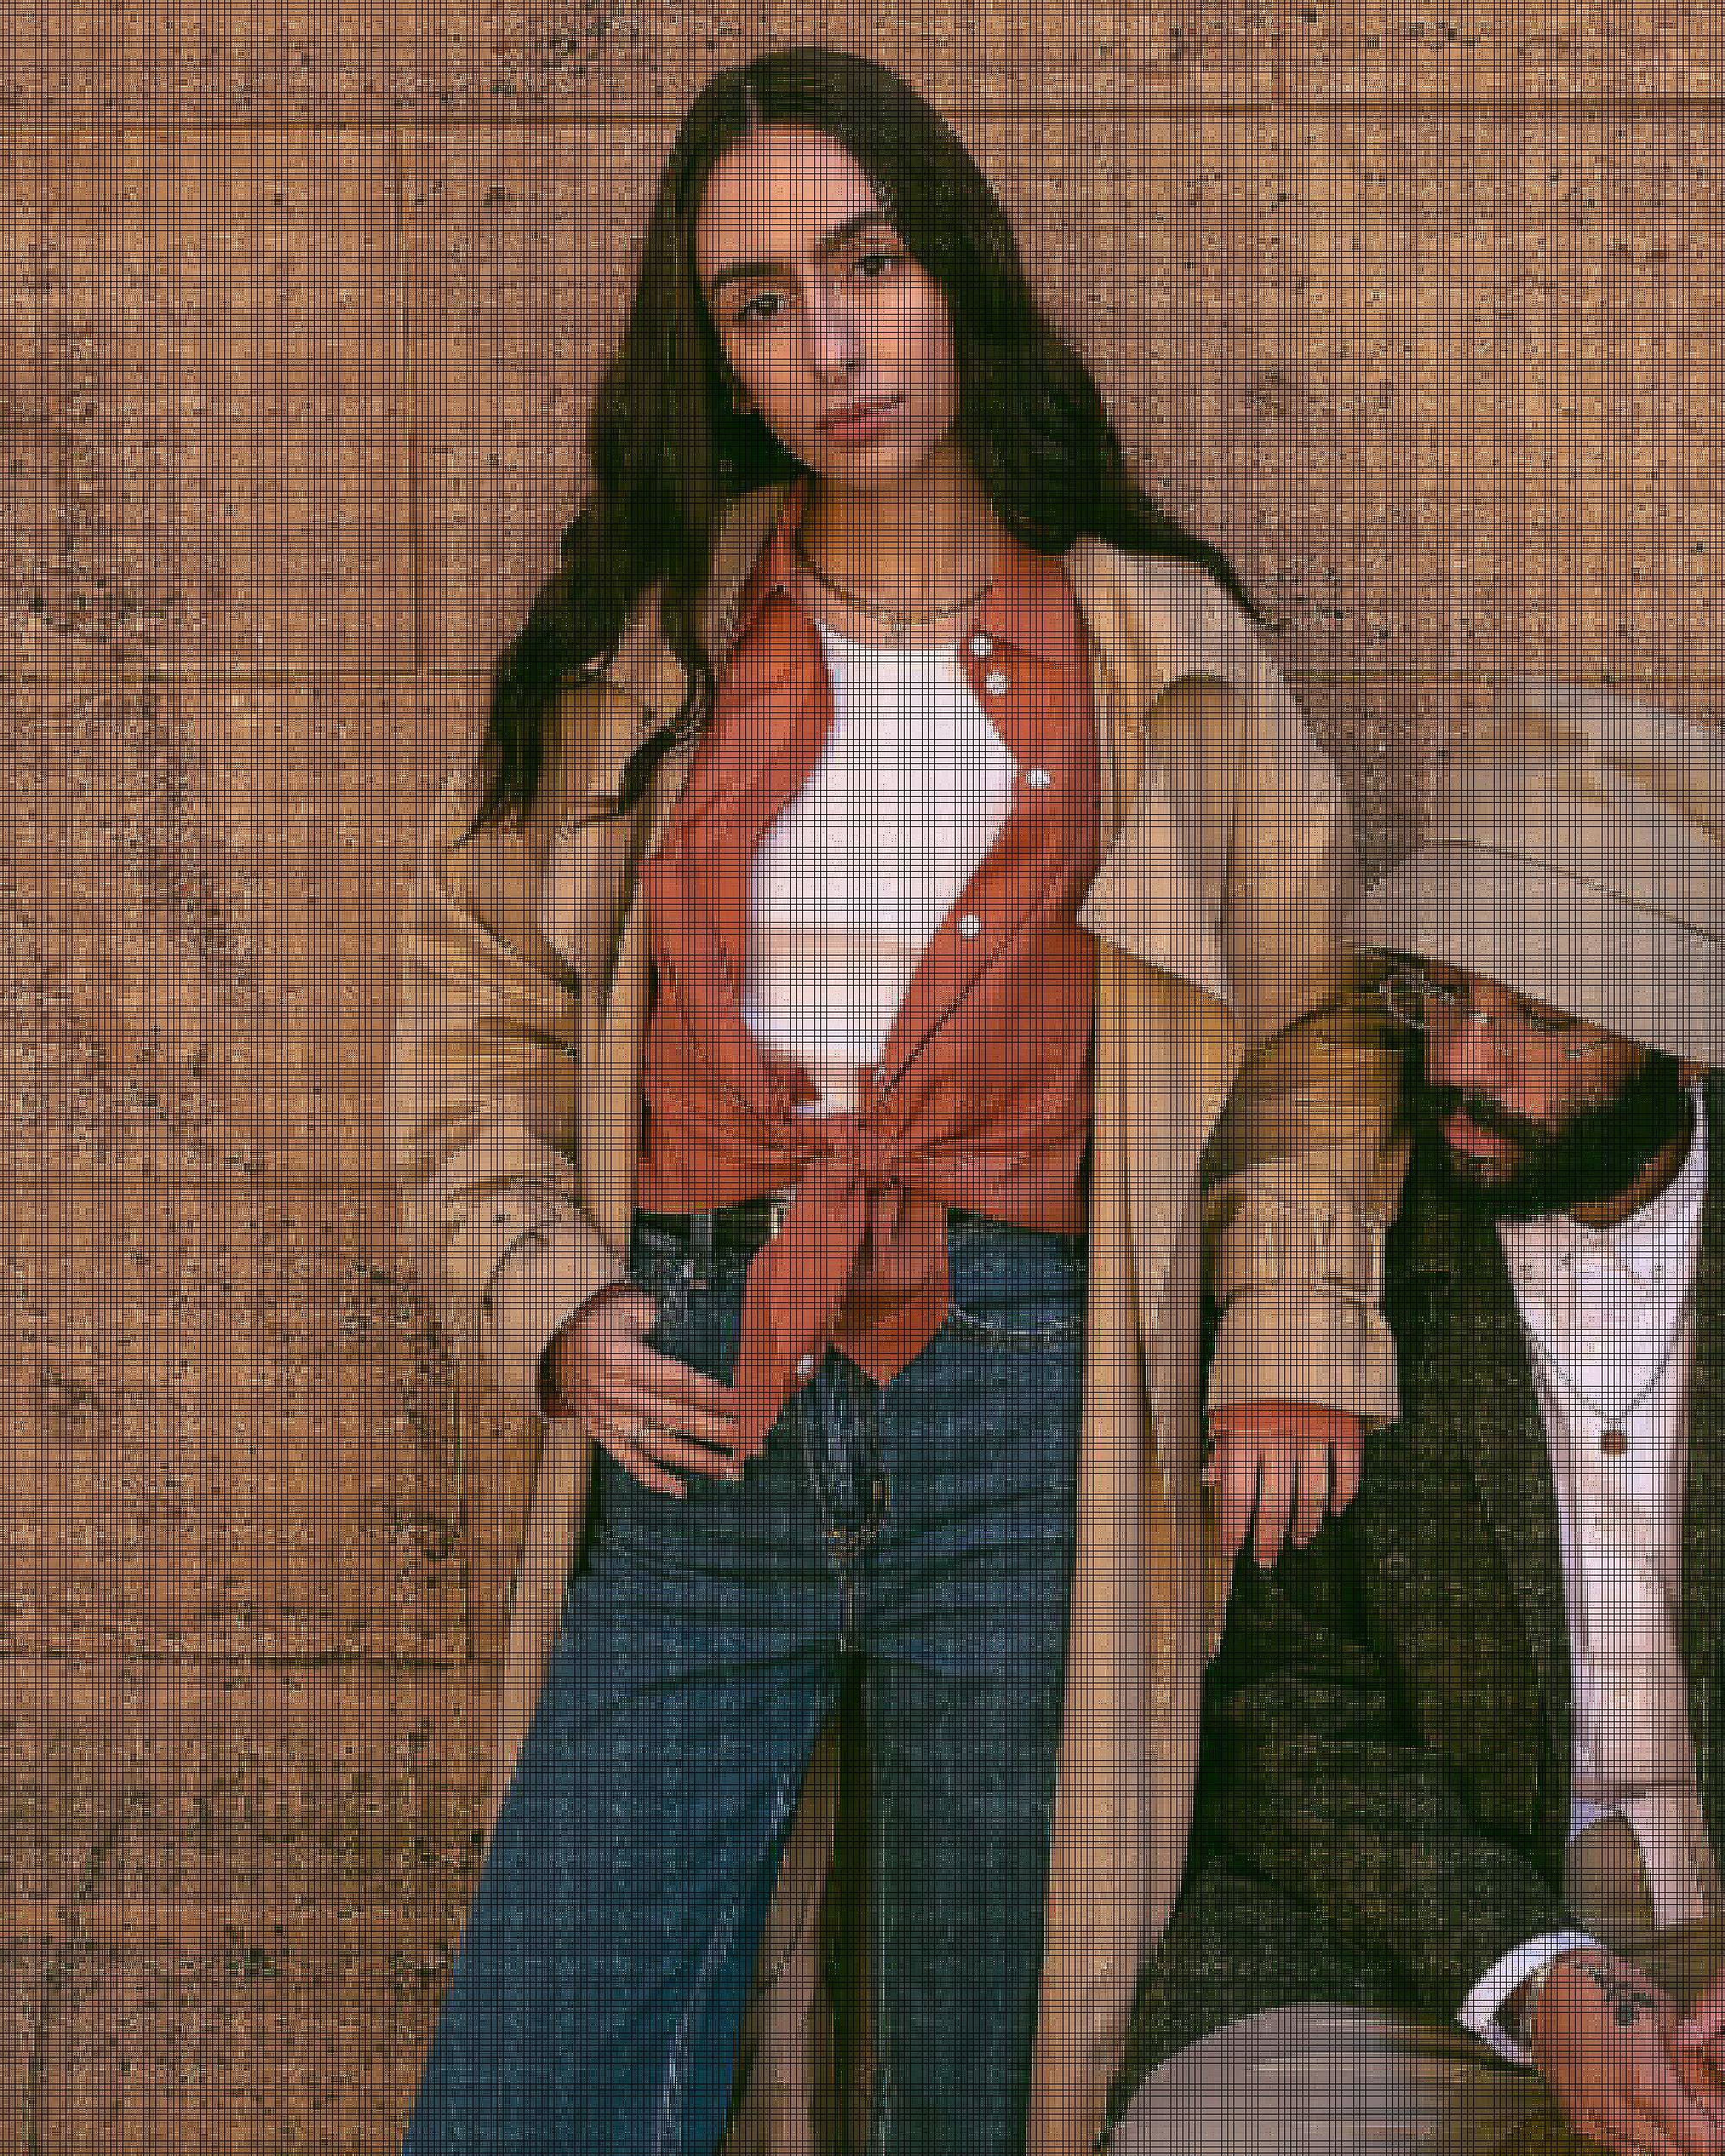 Three images of Levi's® employees Adeline Hocine and Paul Bellas. The left image is of Paul in a green camo jacket. The middle image is of Adeline in an orange blouse and camel trench coat with her arm resting on Paul sitting against a wall. The right image is of Adeline sunkissed while sitting in a pair of blue jeans and surrounded by monstera plants.